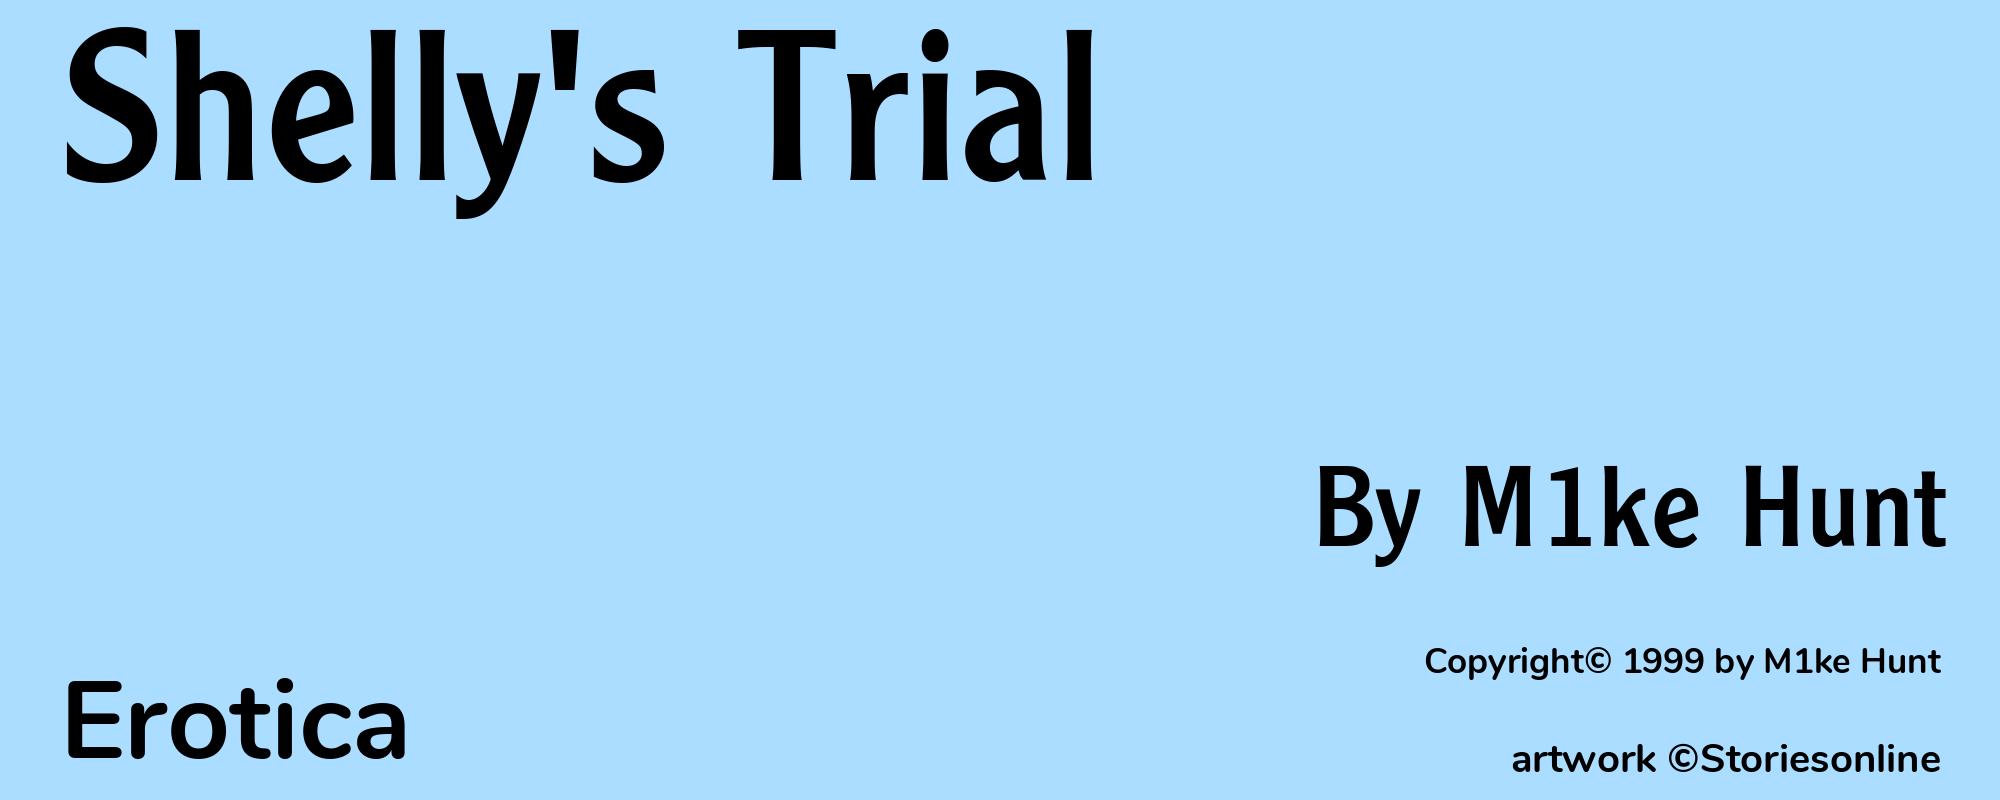 Shelly's Trial - Cover